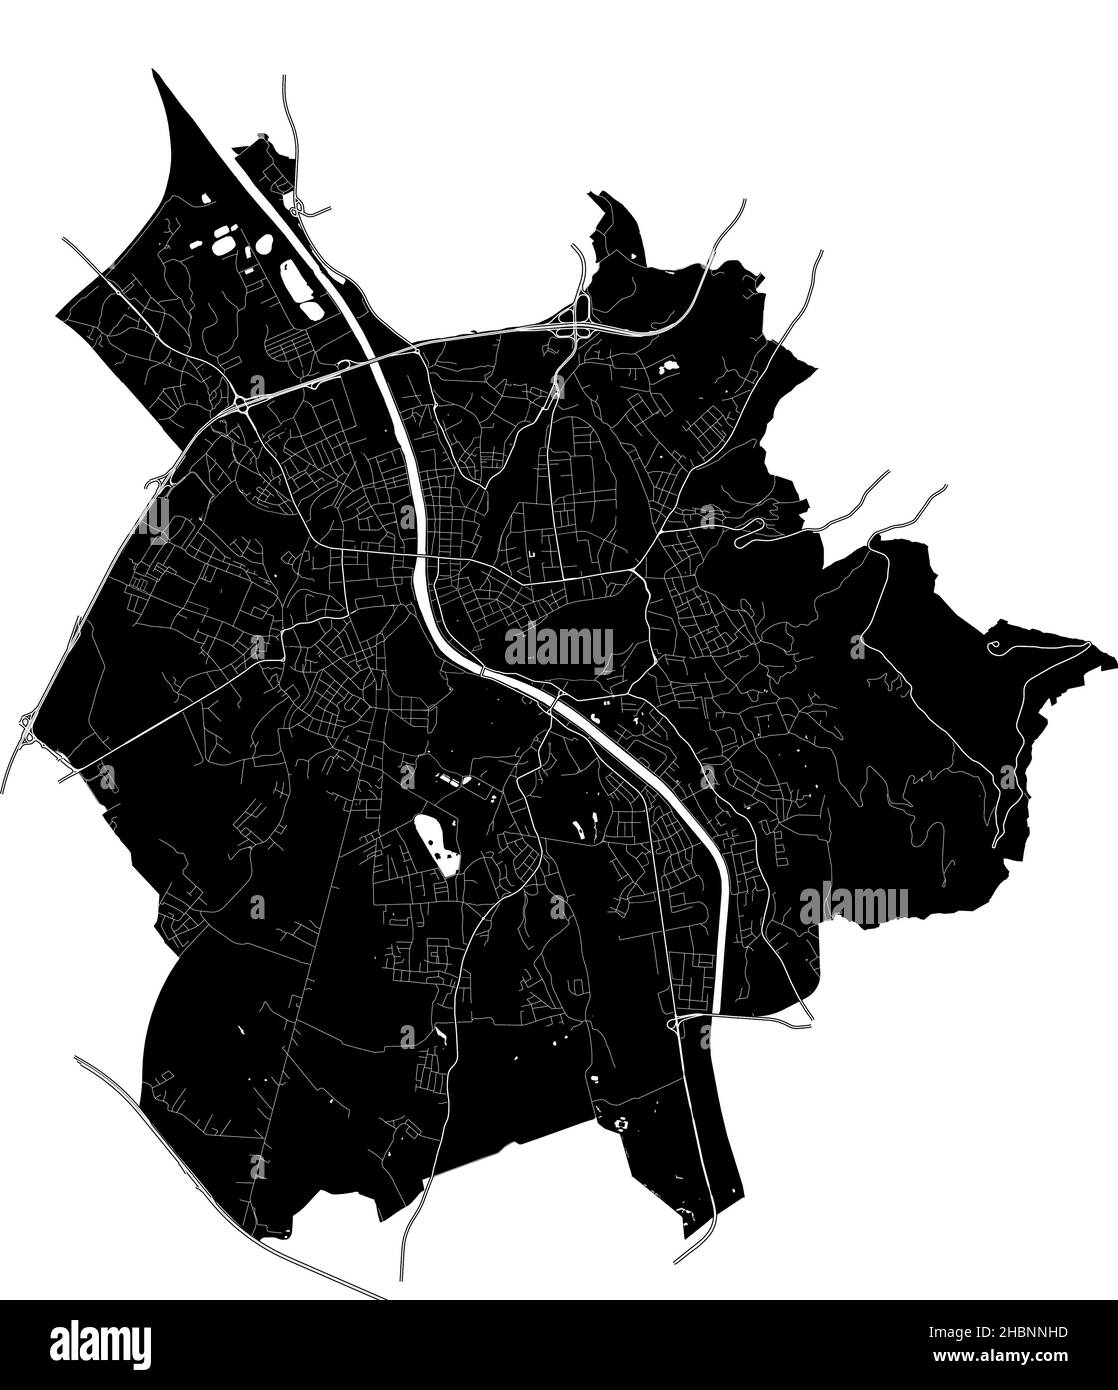 Salzburg, Austria, high resolution vector map with city boundaries, and editable paths. The city map was drawn with white areas and lines for main roa Stock Vector